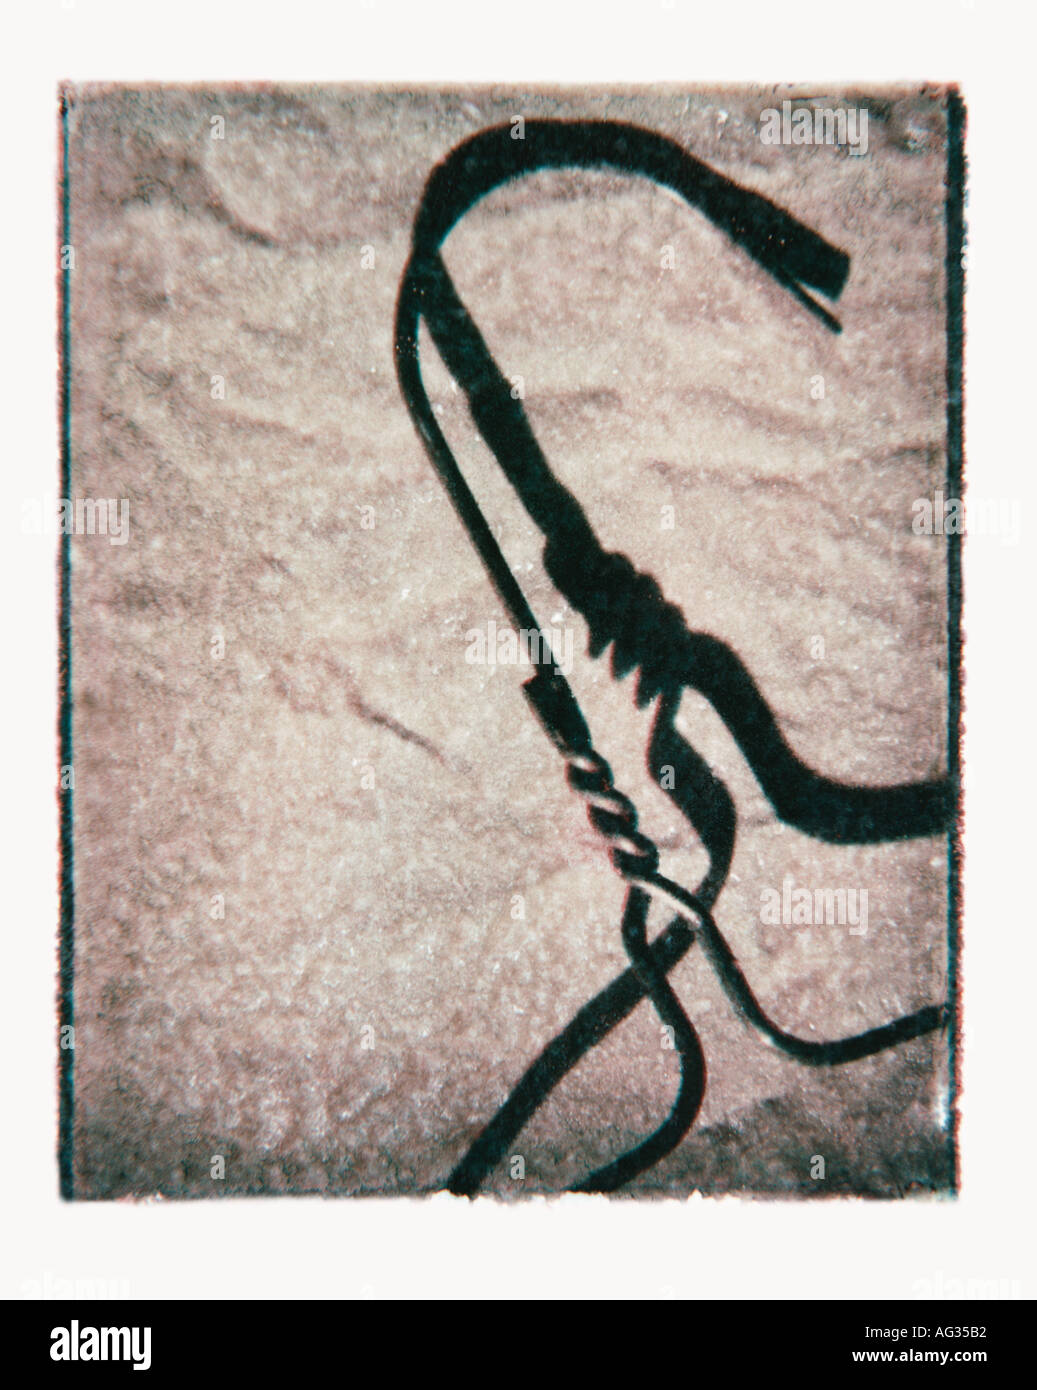 Polaroid transfer image of wire clothes hanger Stock Photo